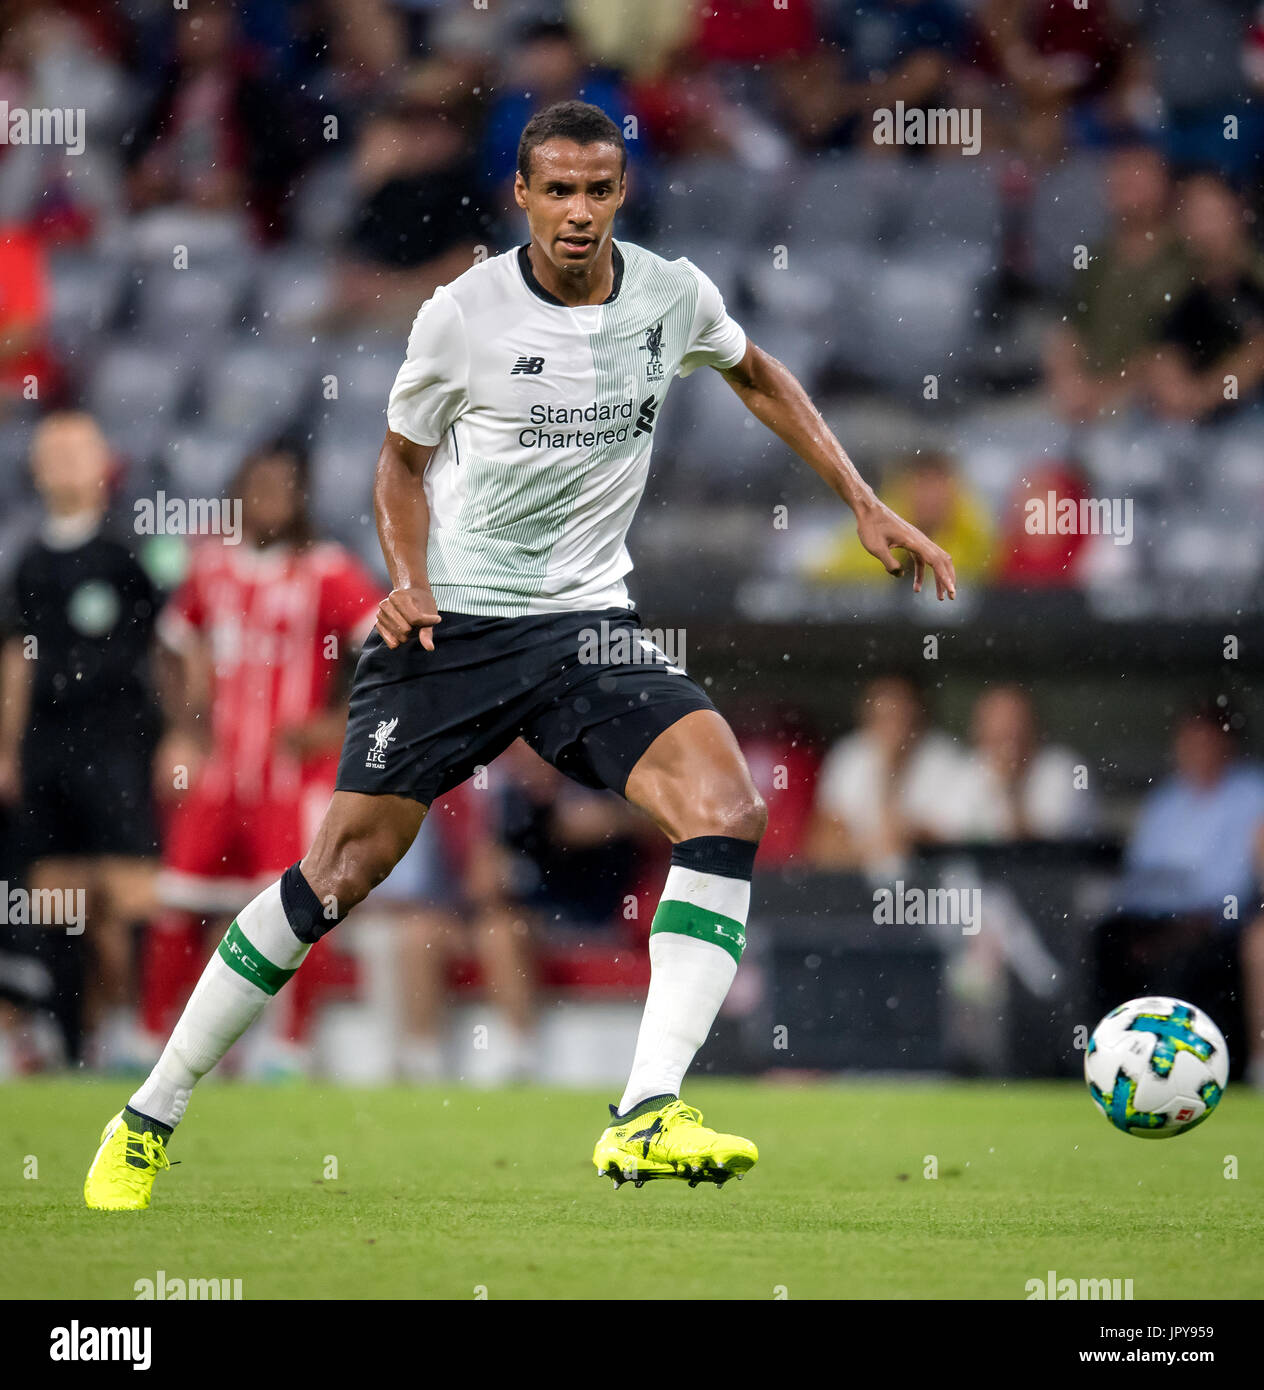 Munich, Germany. 1st Aug, 2017. Liverpool's Joel Matip chases the ball in the game against Bayern Munich during the AUDI Cup 2017 in the Allianz Arena in Munich, Germany, 1 August 2017. - NO WIRE SERVICE · Photo: Thomas Eisenhuth/dpa-Zentralbild/ZB/dpa/Alamy Live News Stock Photo